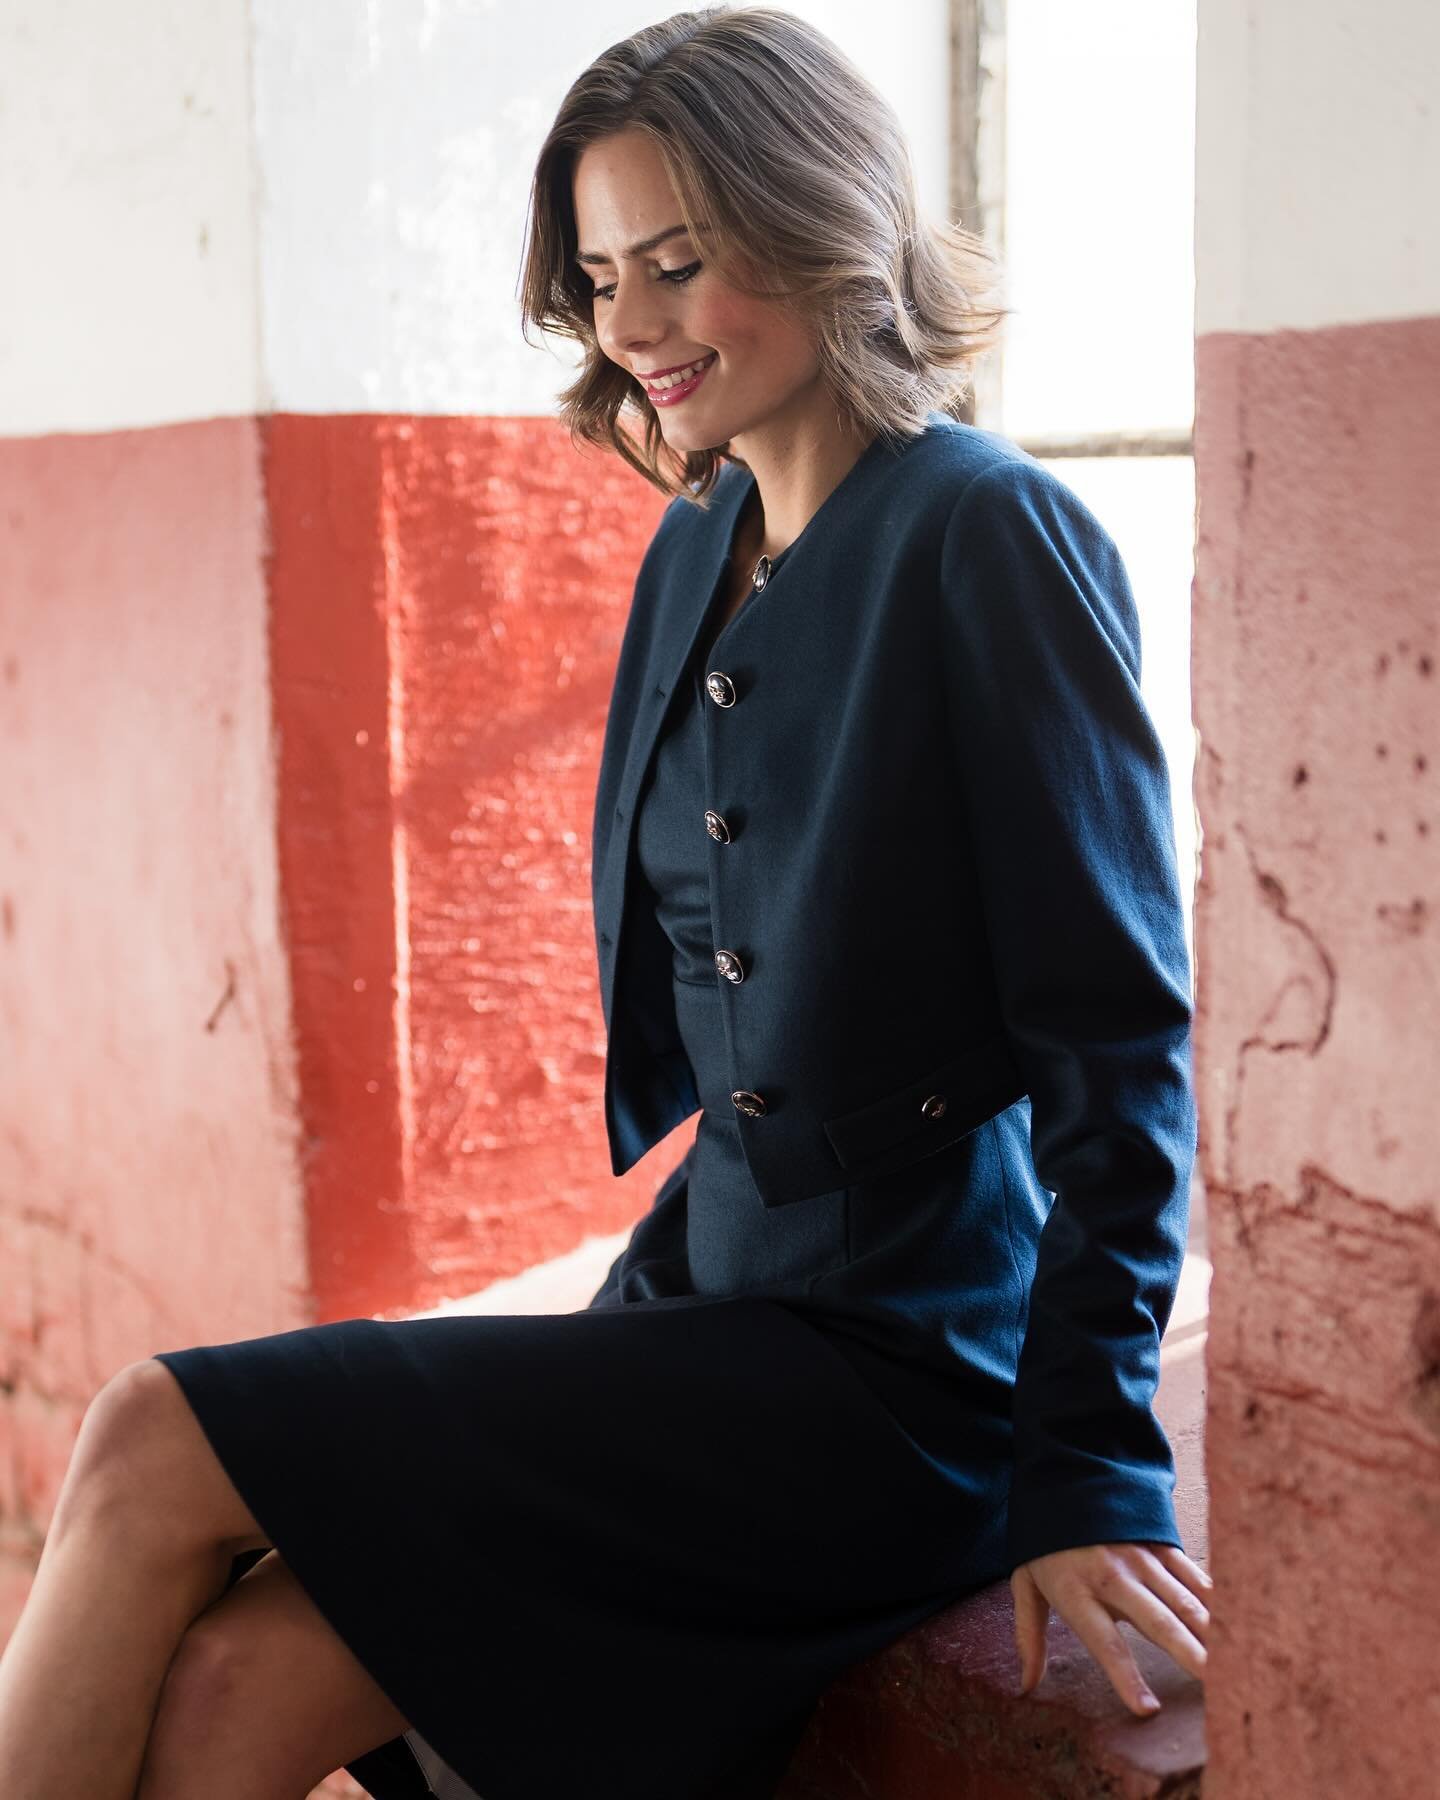 Gorgeous dresses with cropped blazers are the perfect combination for spring! #customclothes #womensfashion